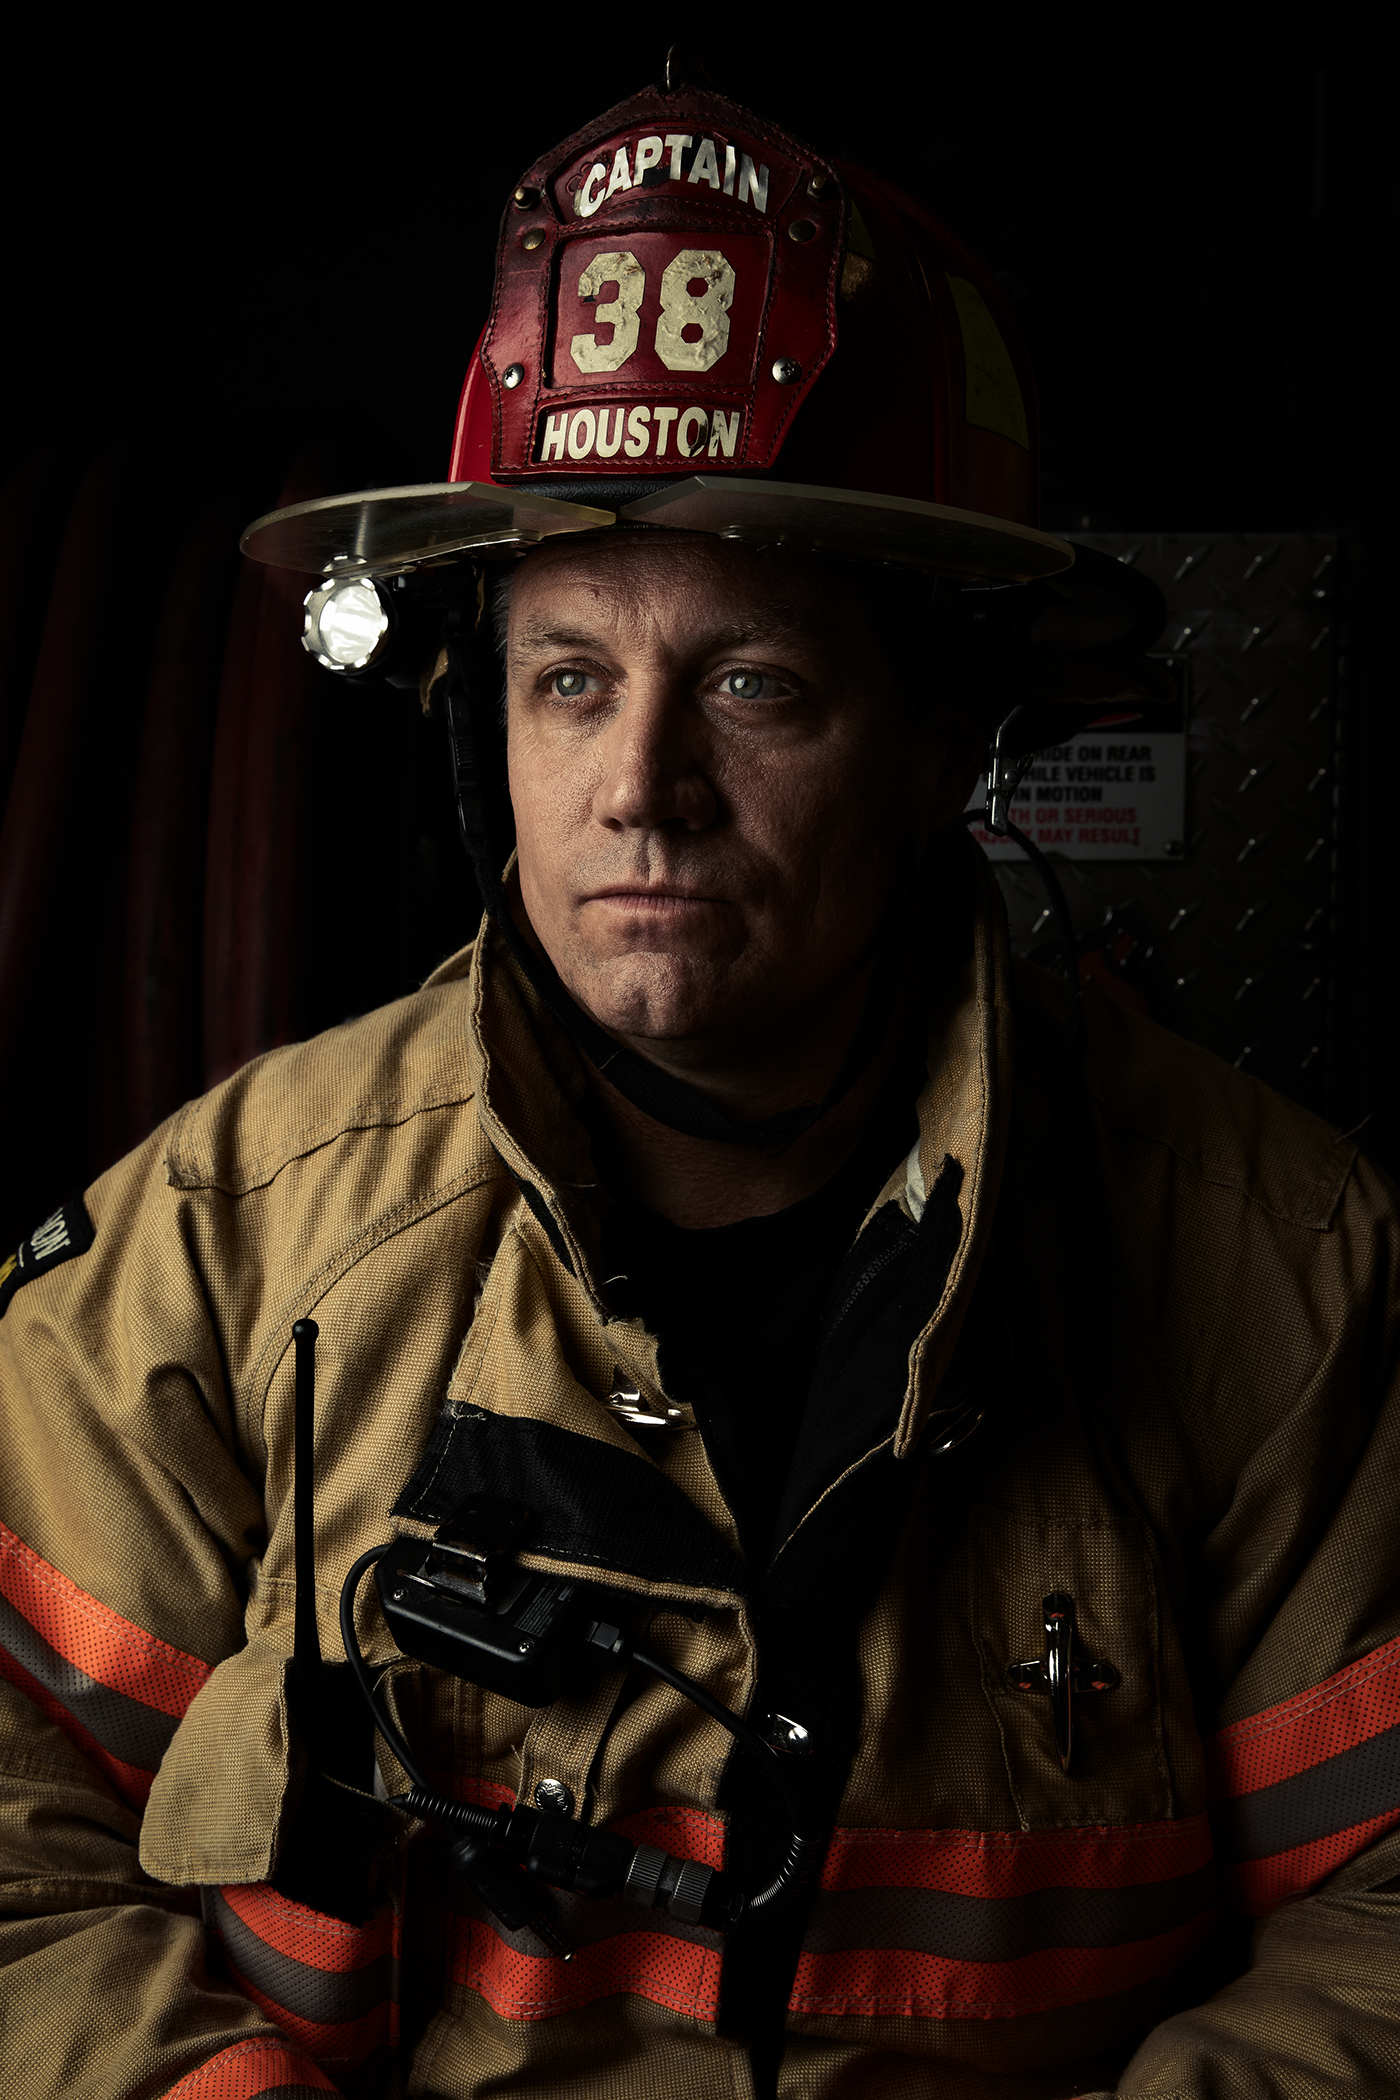 firefighters editorial photography storytelling   Photography 